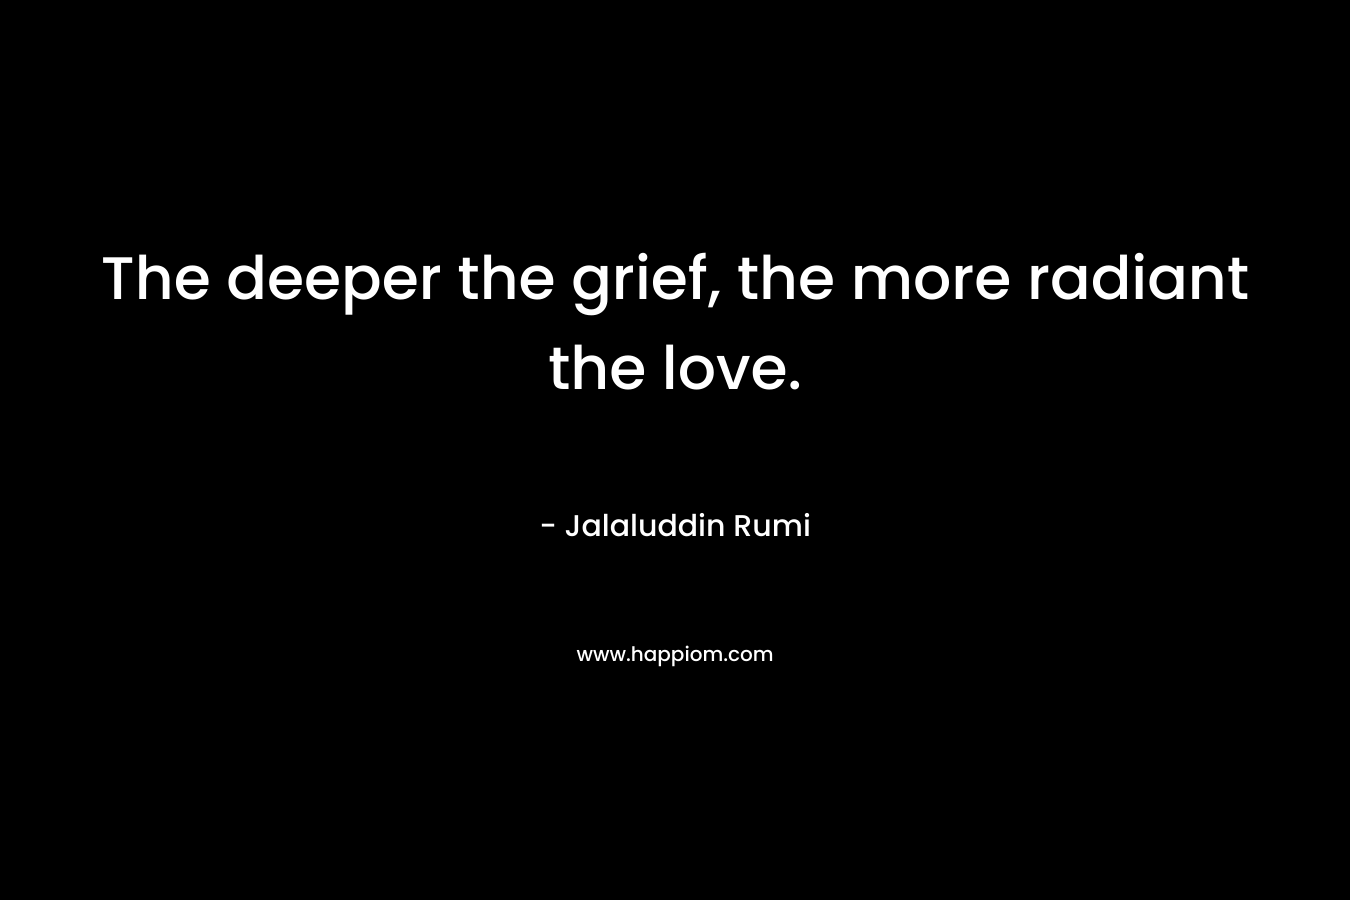 The deeper the grief, the more radiant the love. – Jalaluddin Rumi